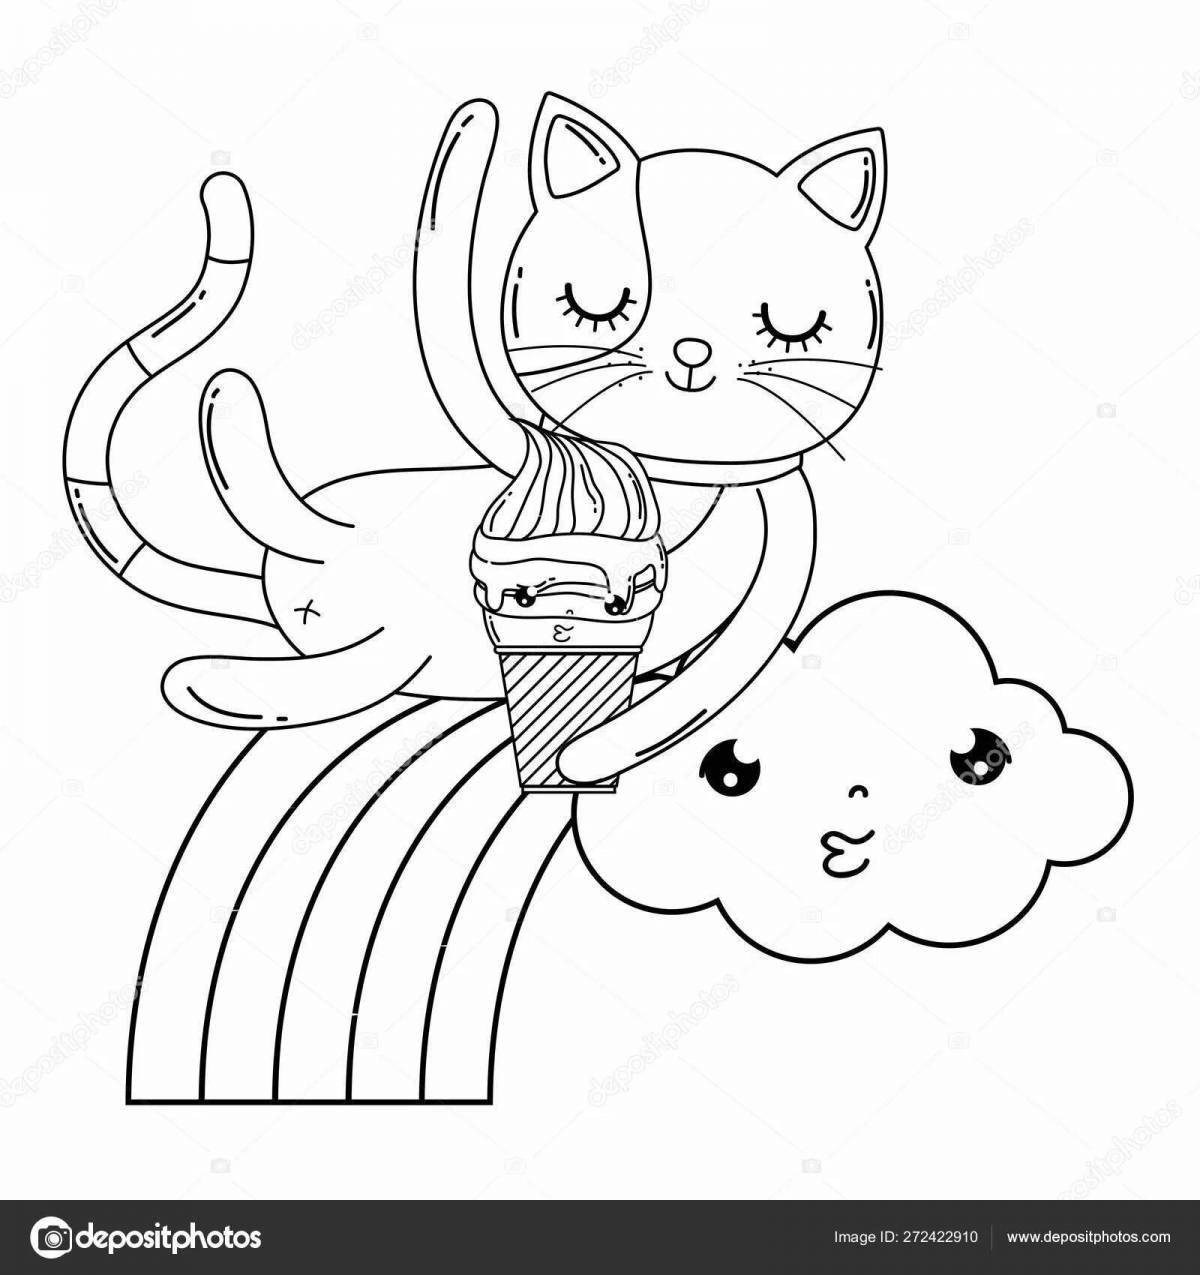 Coloring page witty rainbow cat